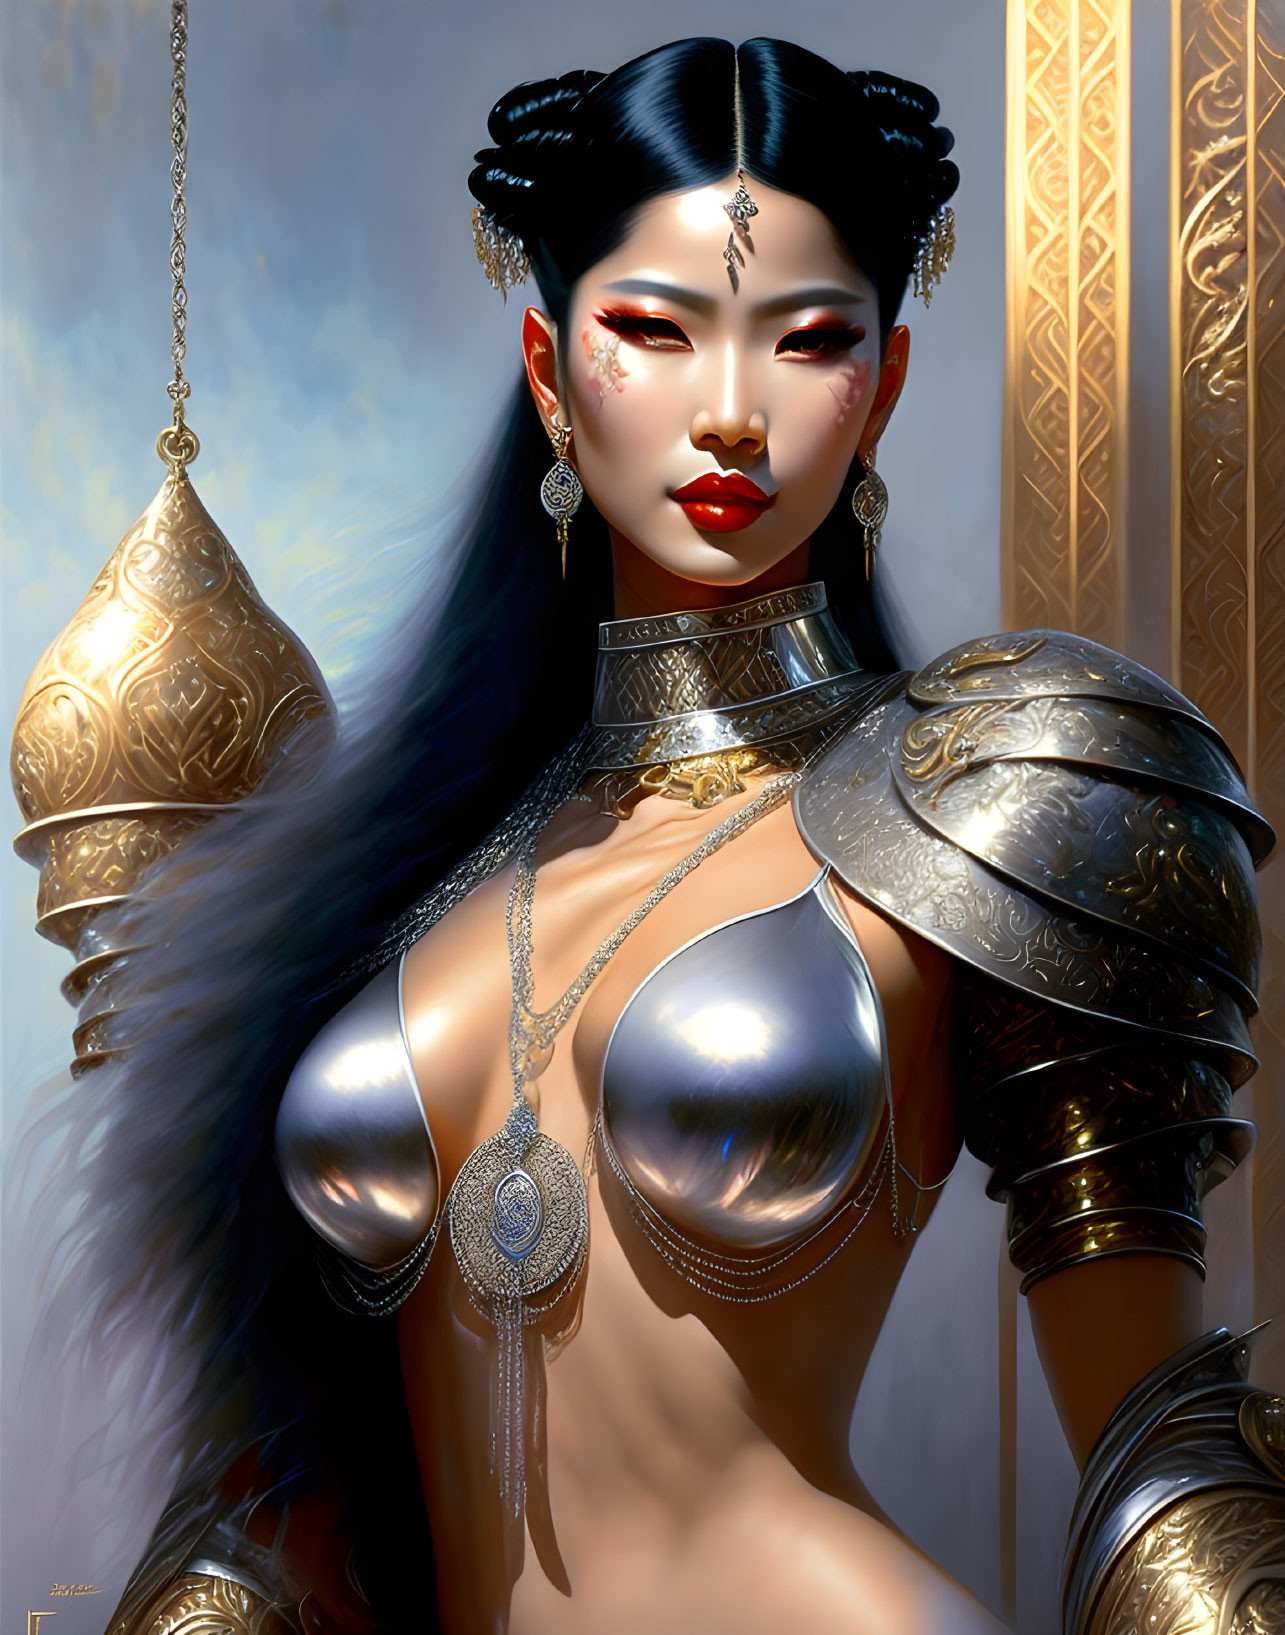 Regal woman in metallic armor and elegant jewelry with traditional makeup and hairstyles.